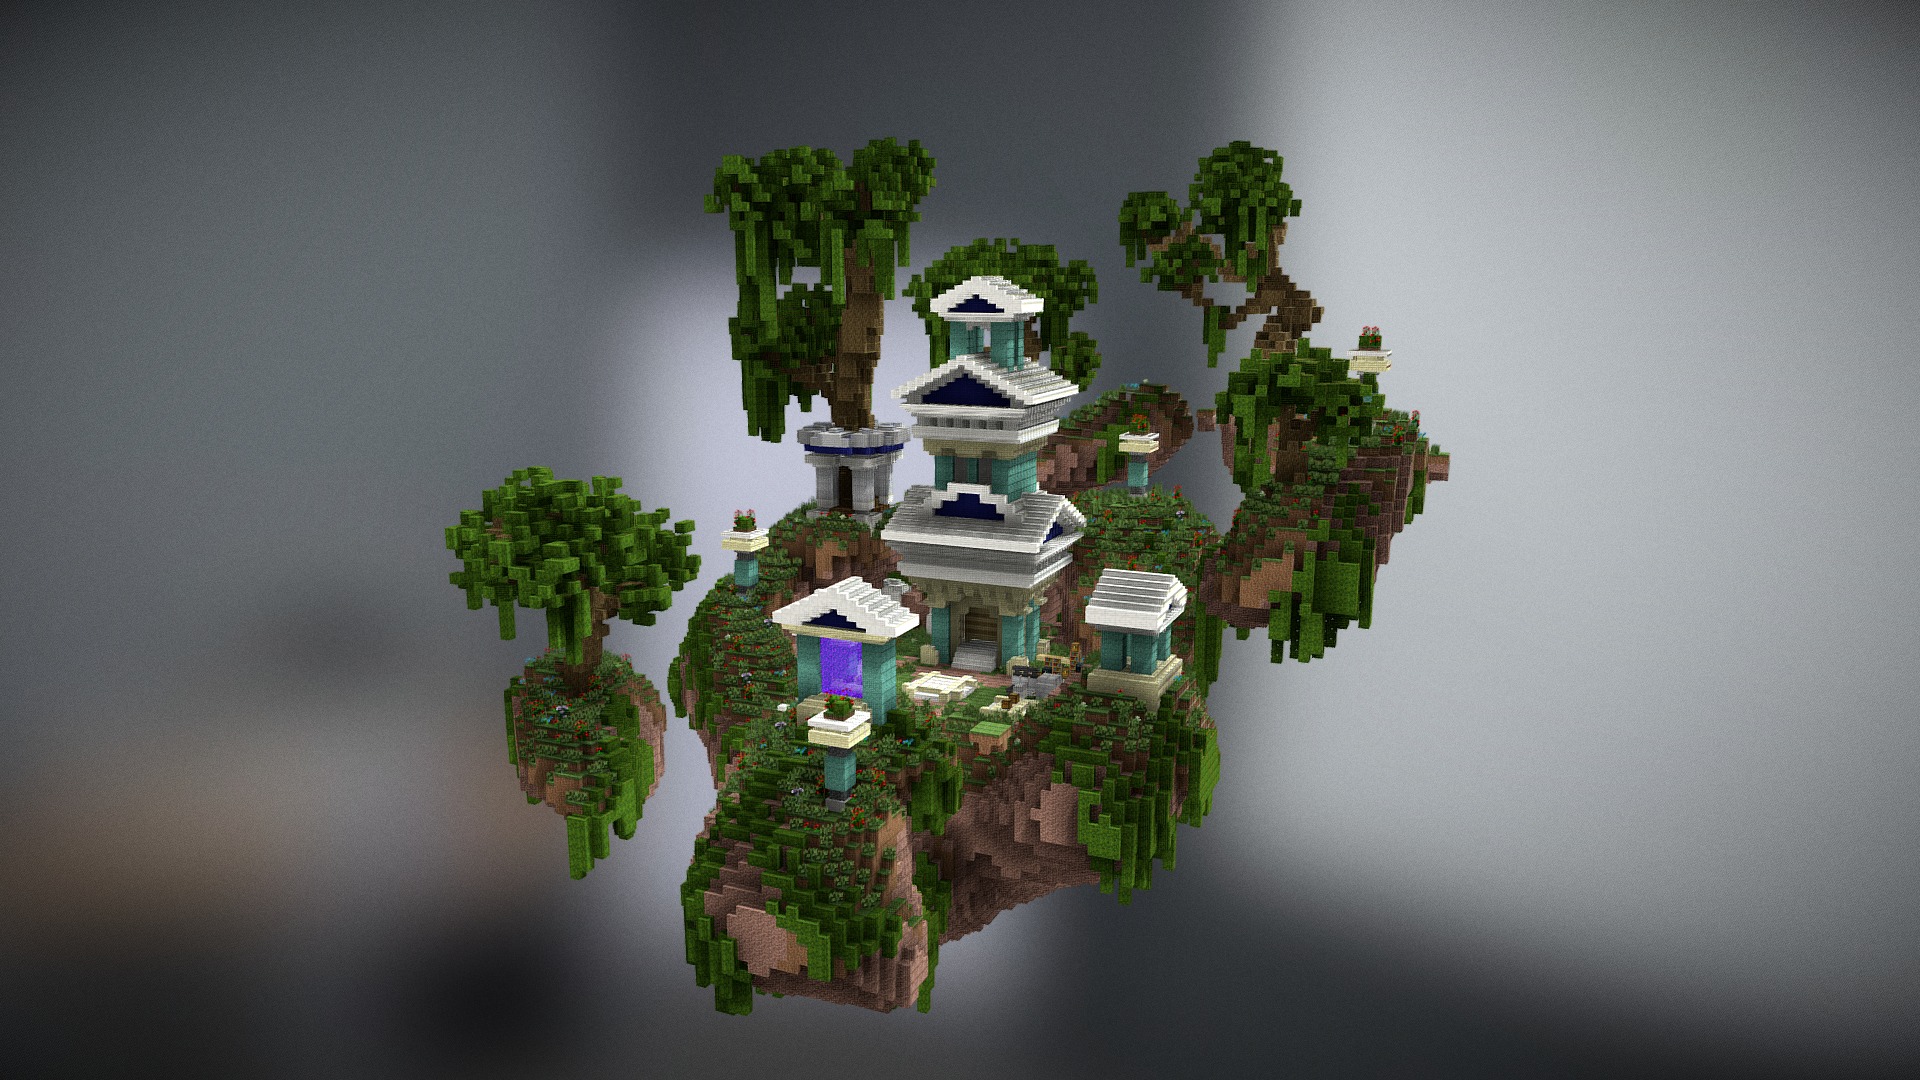 3D model Olympus compact Spawn/Lobby - This is a 3D model of the Olympus compact Spawn/Lobby. The 3D model is about a small island with trees and buildings.